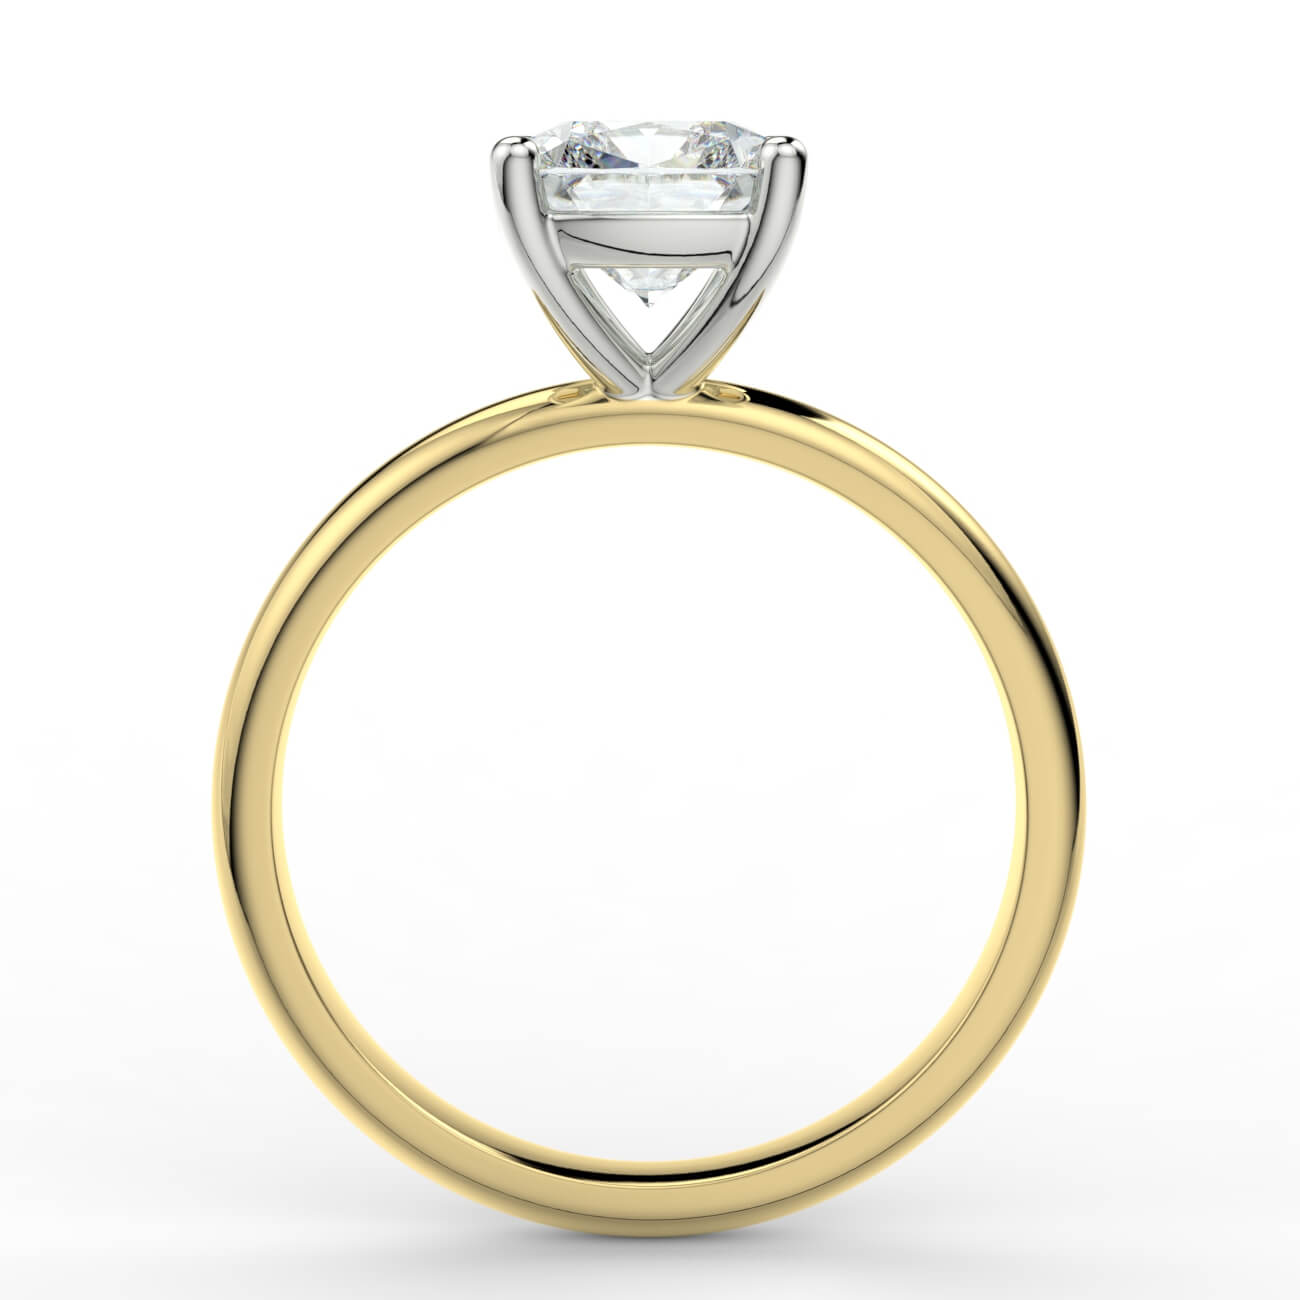 Solitaire cushion cut diamond engagement ring in yellow and white gold – Australian Diamond Network